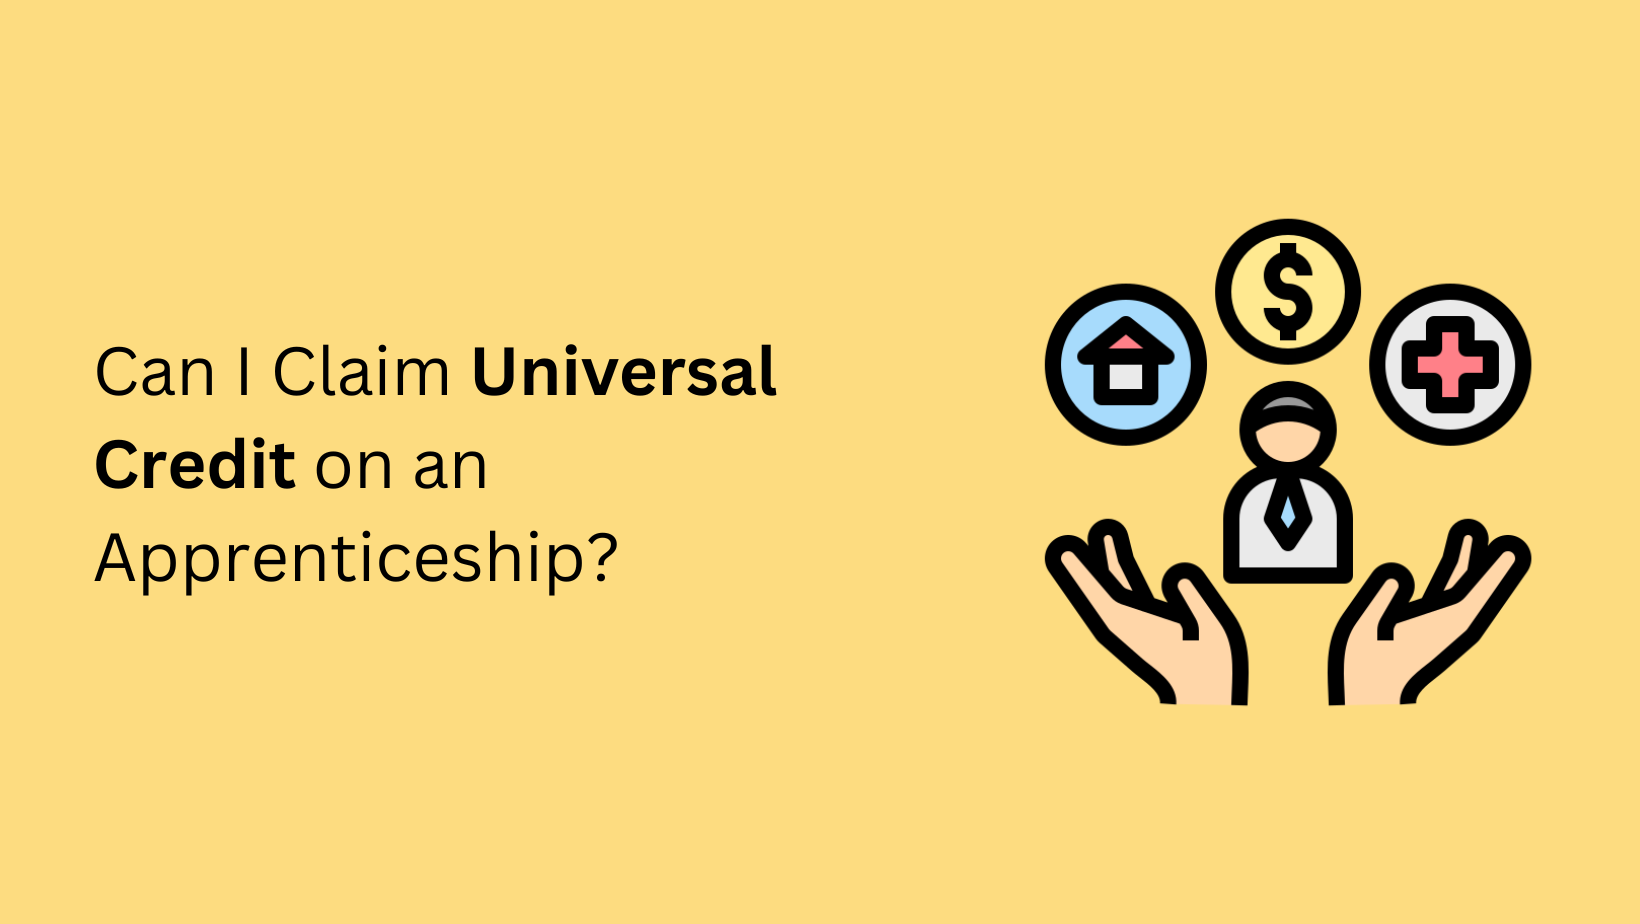 Can I Claim Universal Credit on an Apprenticeship